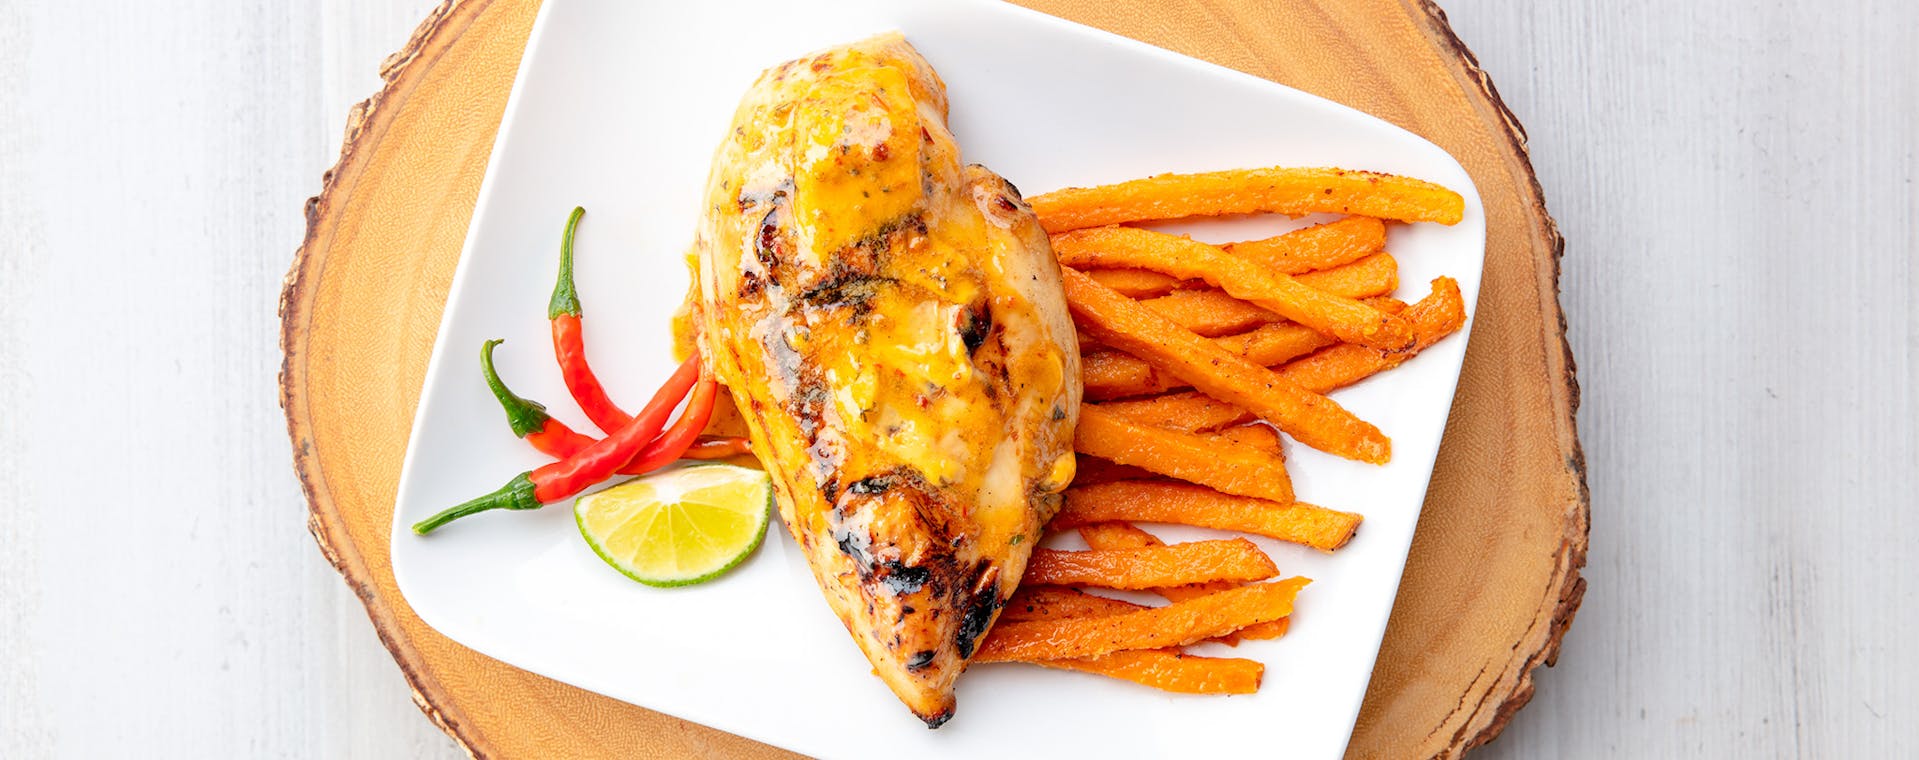 Chicken with Chili Lime flavored butter and sweet potato fries